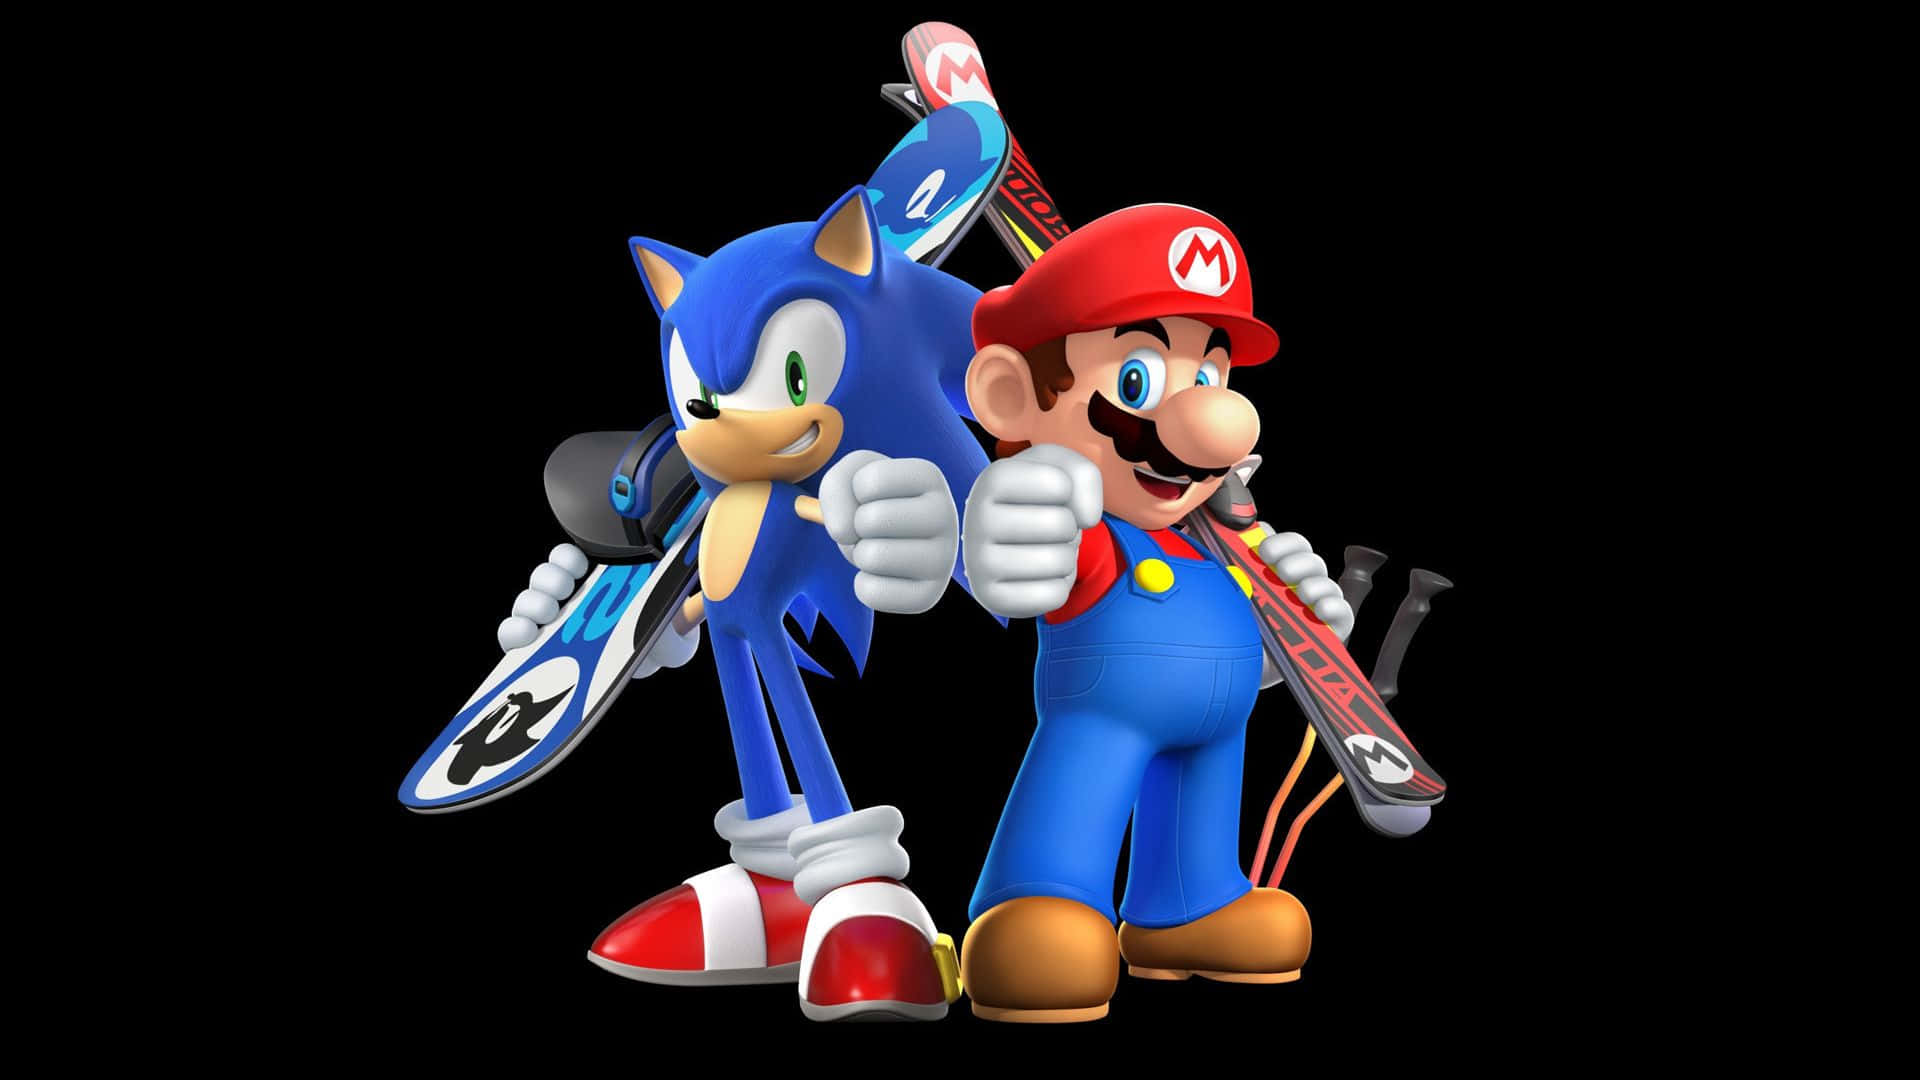 Mario And Sonic At The Olympic Games 1920 X 1080 Wallpaper Wallpaper